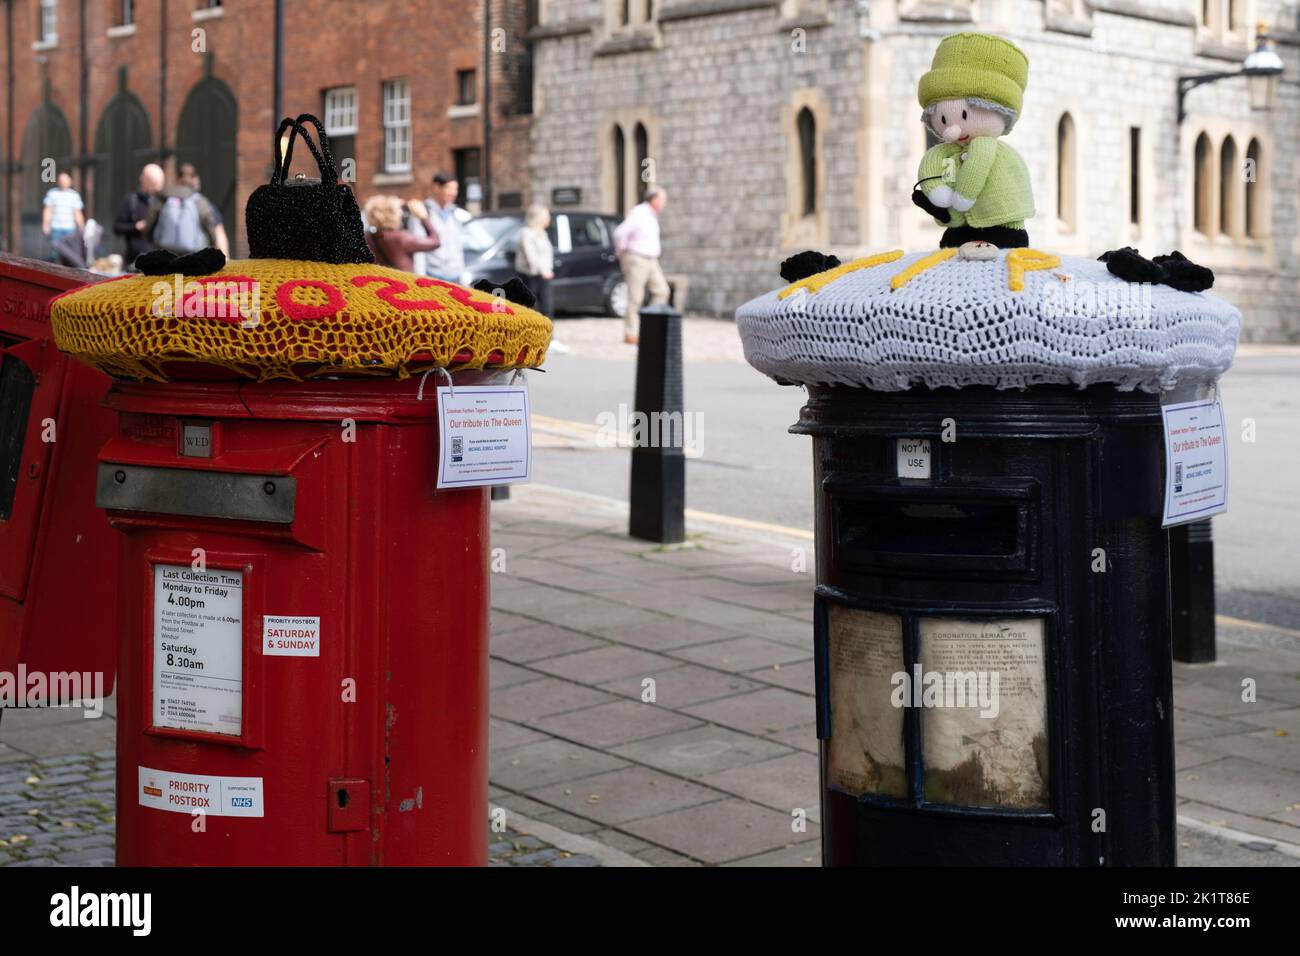 Knitted and crocheted doll and handbag, depicting Queen Elizabeth, draped over a mailbox in tribute to Queen Elizabeth II after her death Stock Photo